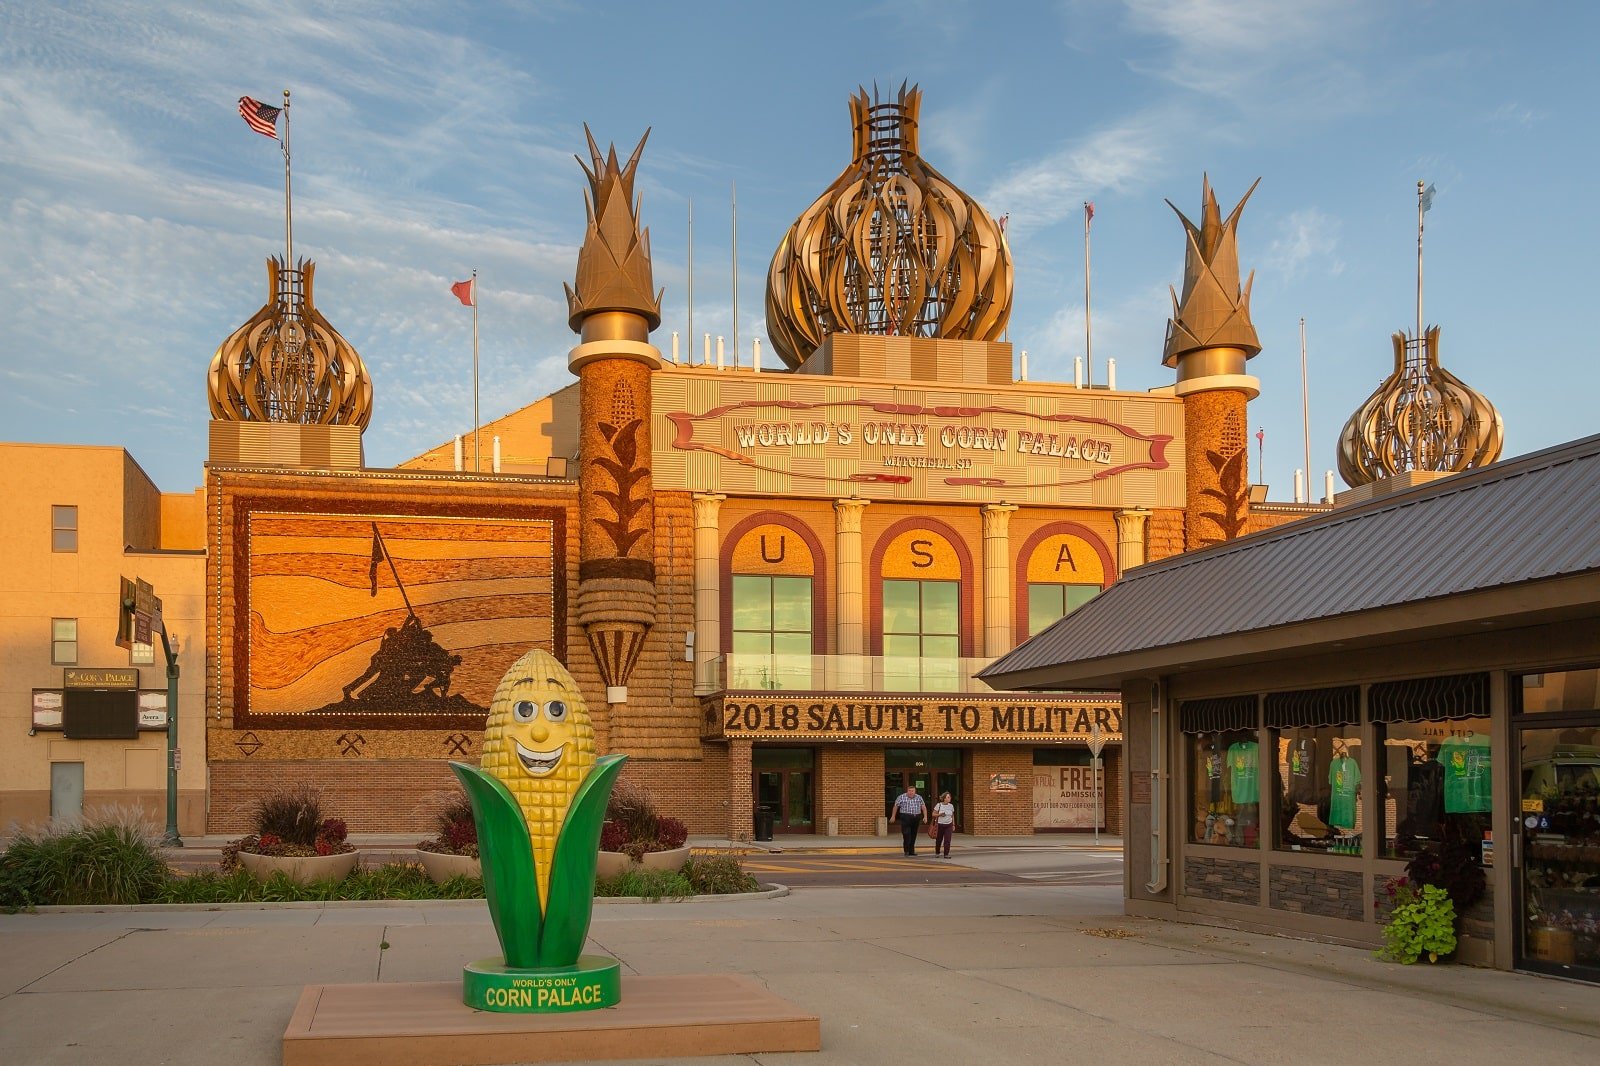 <p><span>The Corn Palace in Mitchell, South Dakota, is a unique American landmark decorated annually with murals made entirely of corn and other grains. This tradition, dating back to 1892, celebrates South Dakota’s rich agricultural heritage.</span></p> <p><span>The designs are intricate and change yearly, making each visit a new experience. Inside, the palace is a multi-use center with exhibits on its history and the corn mural process. It’s a fascinating stop for those interested in folk art and agrarian traditions.</span></p> <p><b>Insider’s Tip: </b><span>Check out the annual Corn Palace Festival in late August for extra festivities.</span></p> <p><b>When To Travel: </b><span>Open year-round, but the new murals are usually completed by late August.</span></p> <p><b>How To Get There: </b><span>Situated in downtown Mitchell, it is easily accessible from I-90.</span></p>